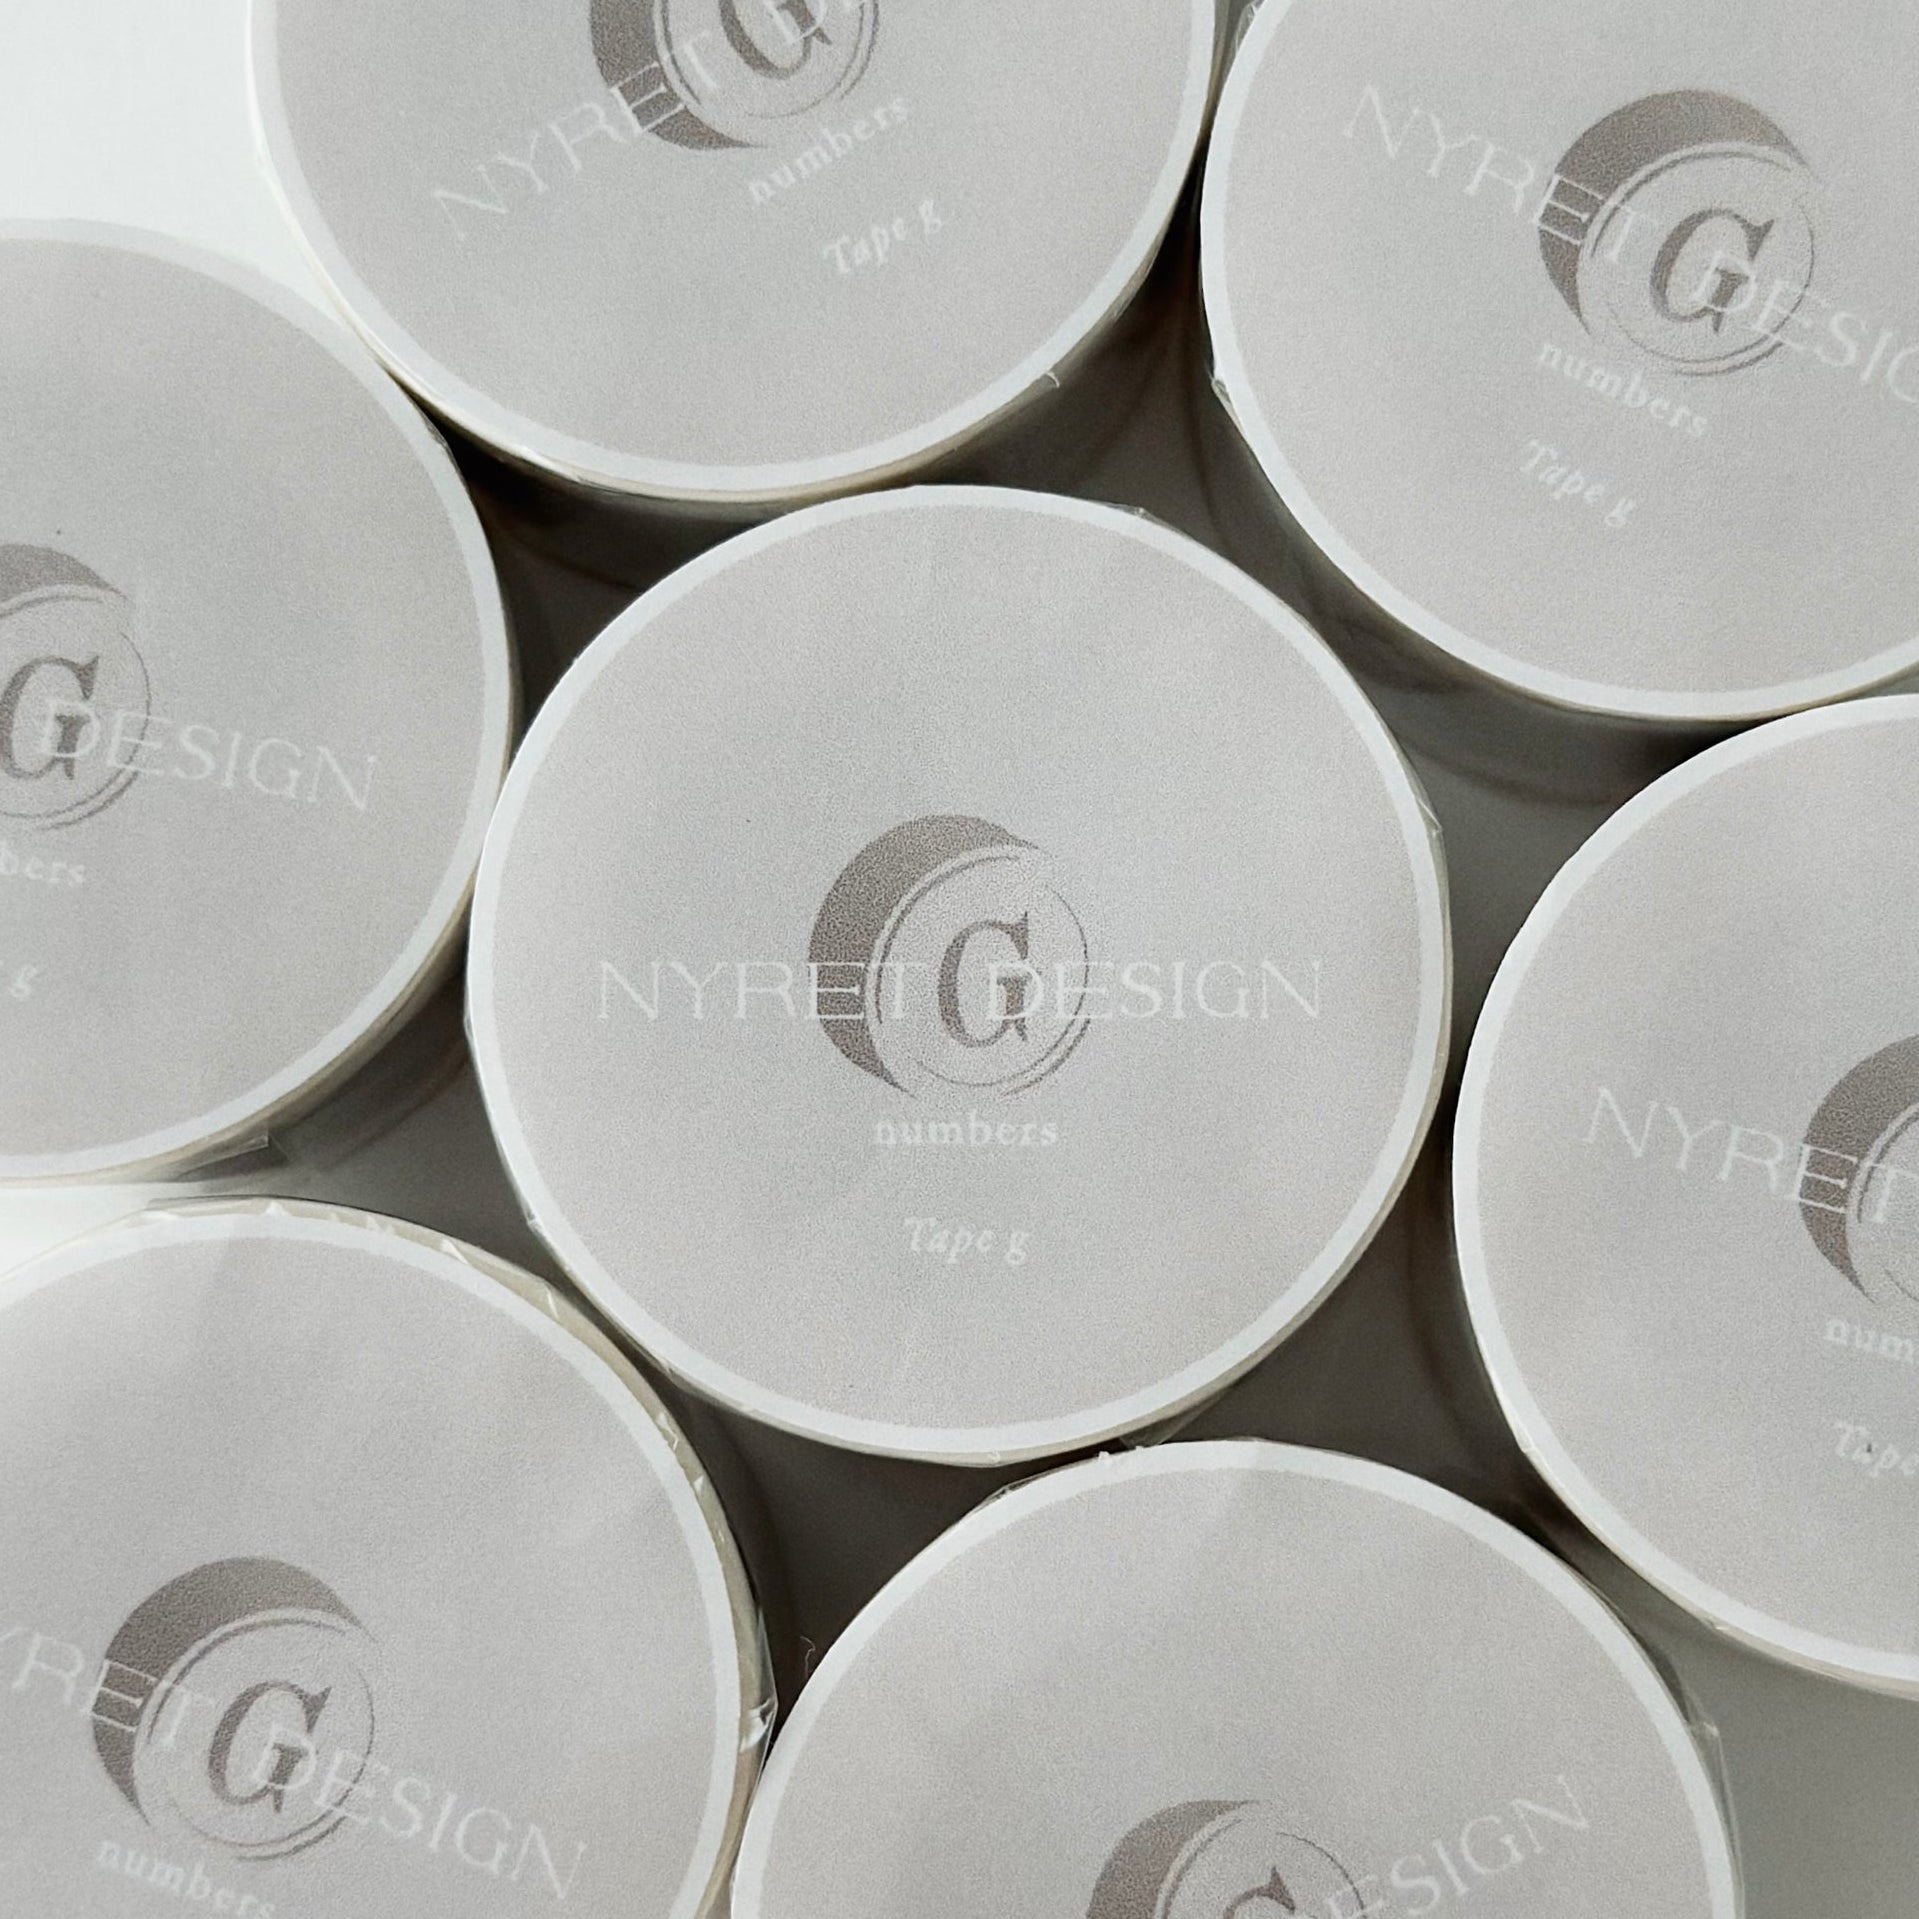 NYRET Washi Tape - G - Numbers